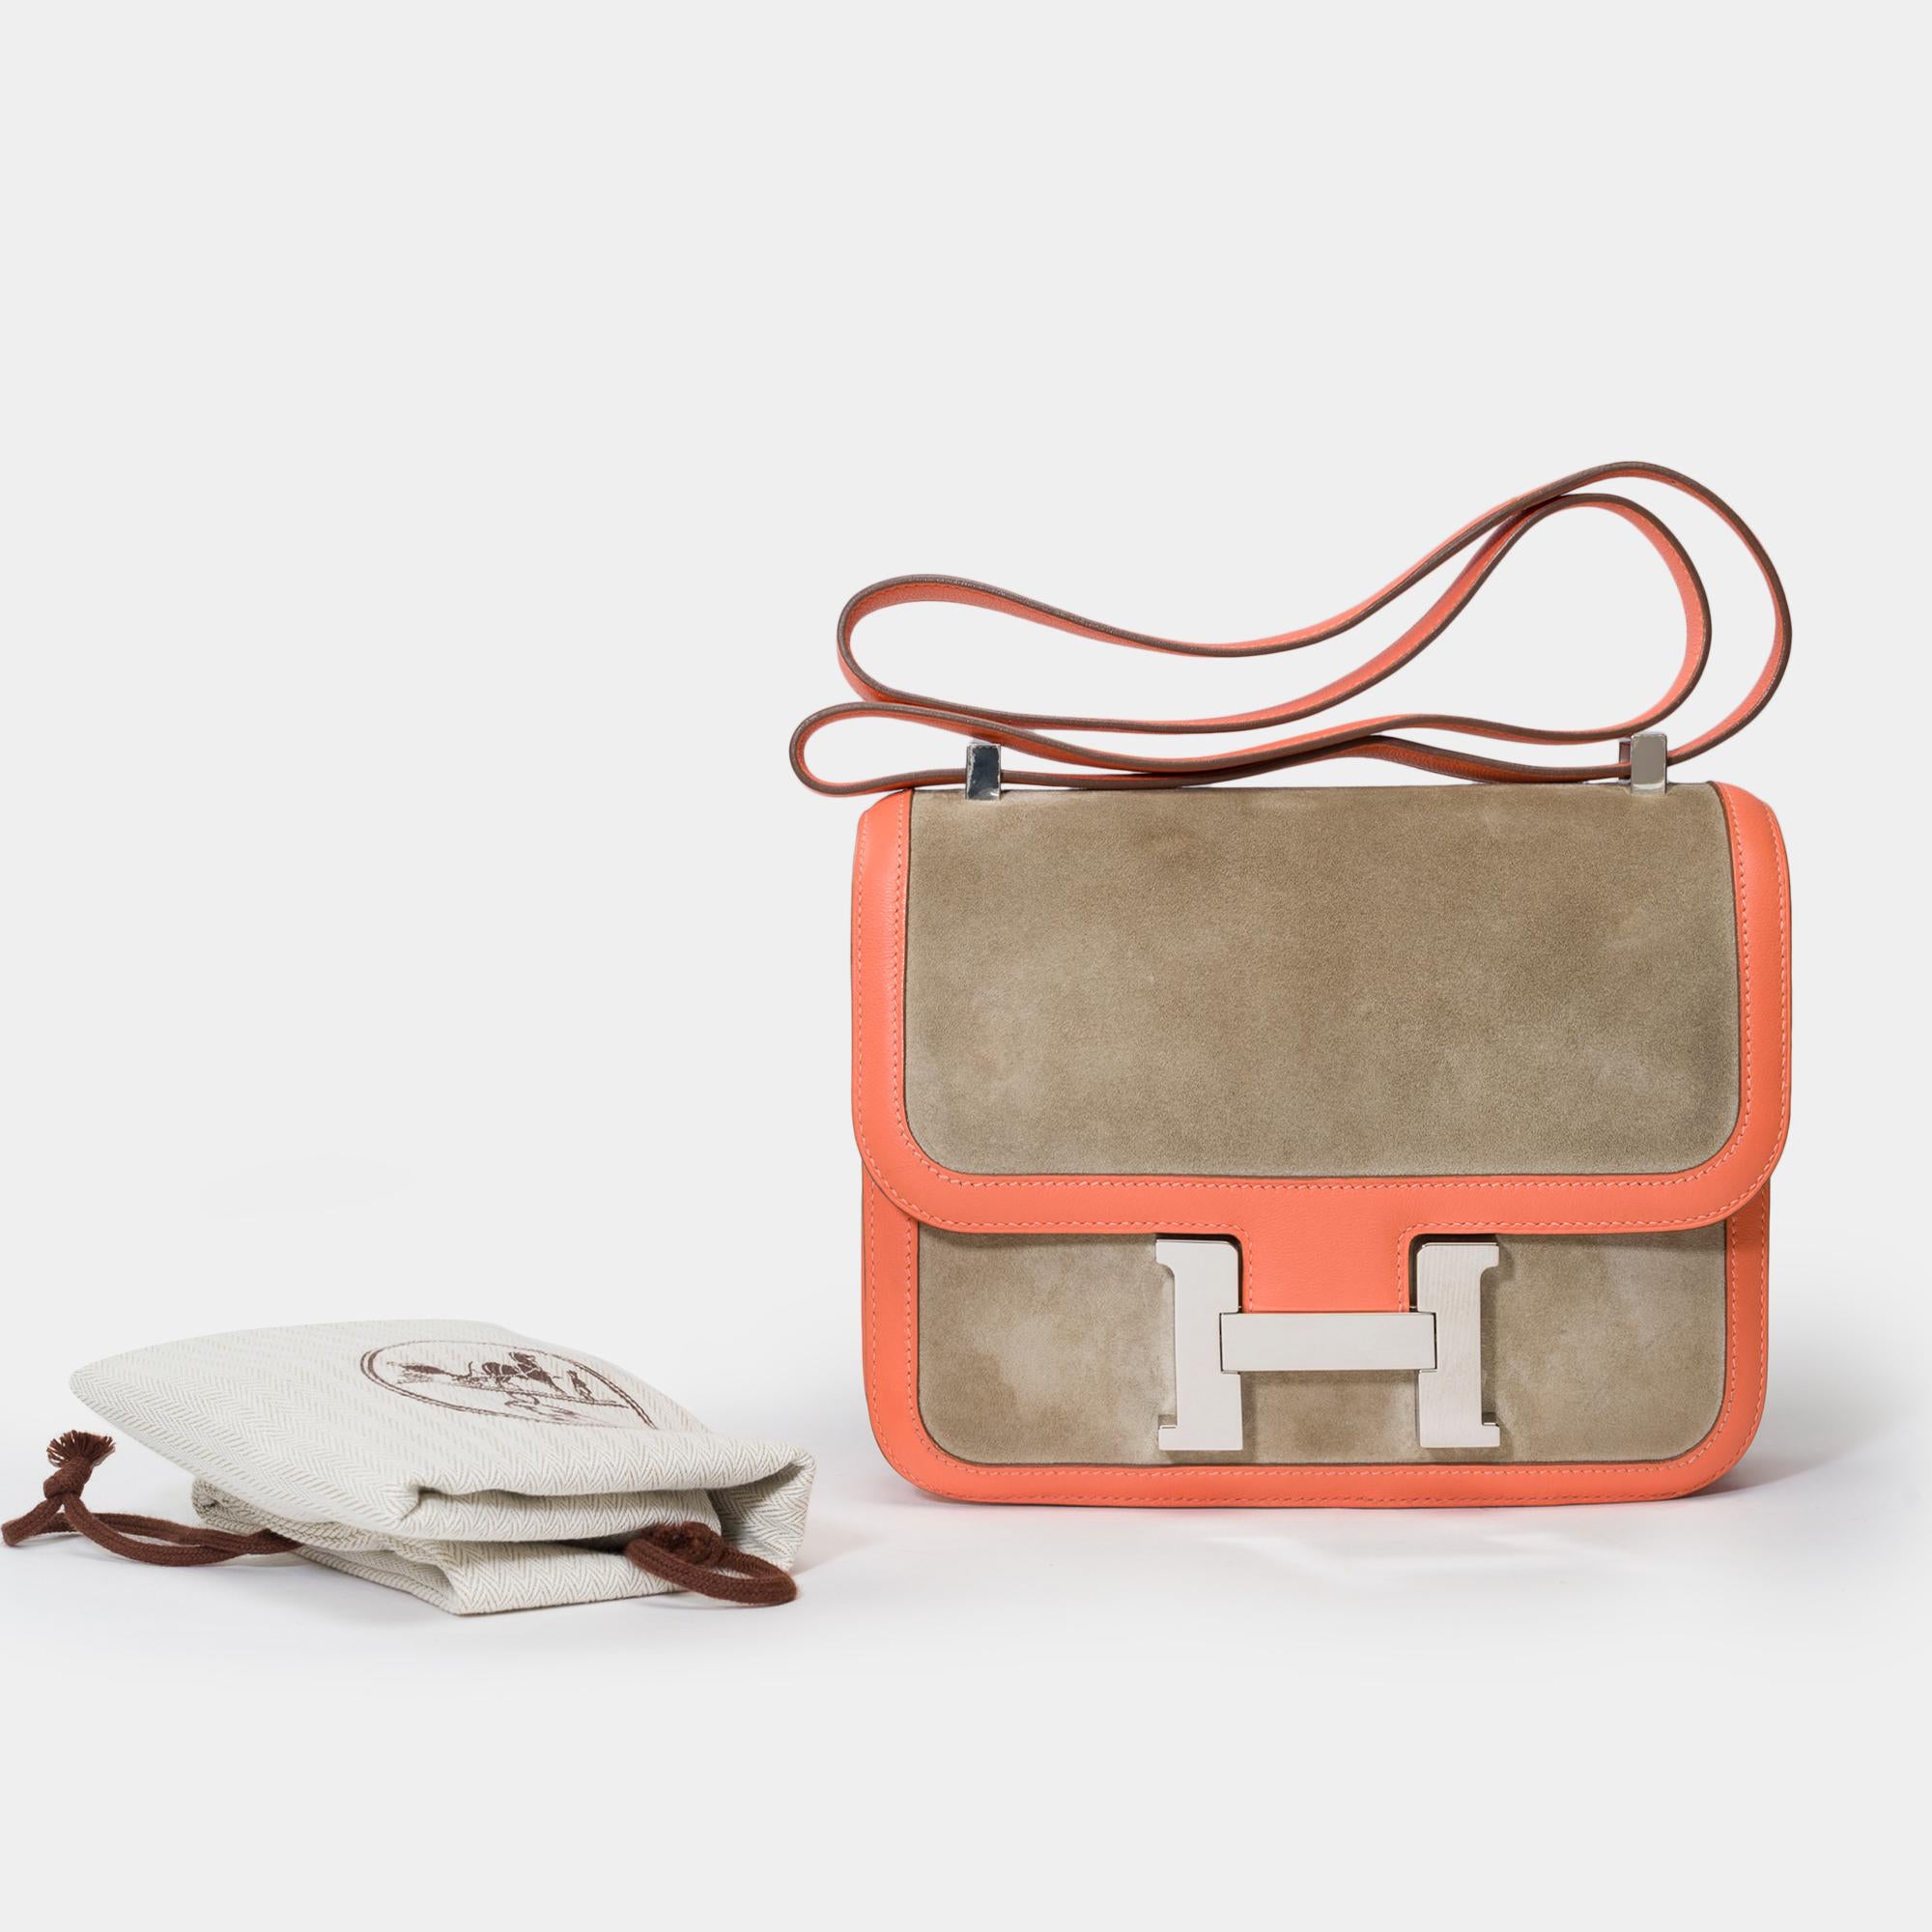 Rare & Exceptional Hermès Constance 23 limited edition in Grey Tourterelle Calf Doblis and Crevette swift leather , metal palladium silver trim, a shoulder strap in pink leather allowing shoulder or crossbody carry

Logo closure on flap
Pink leather